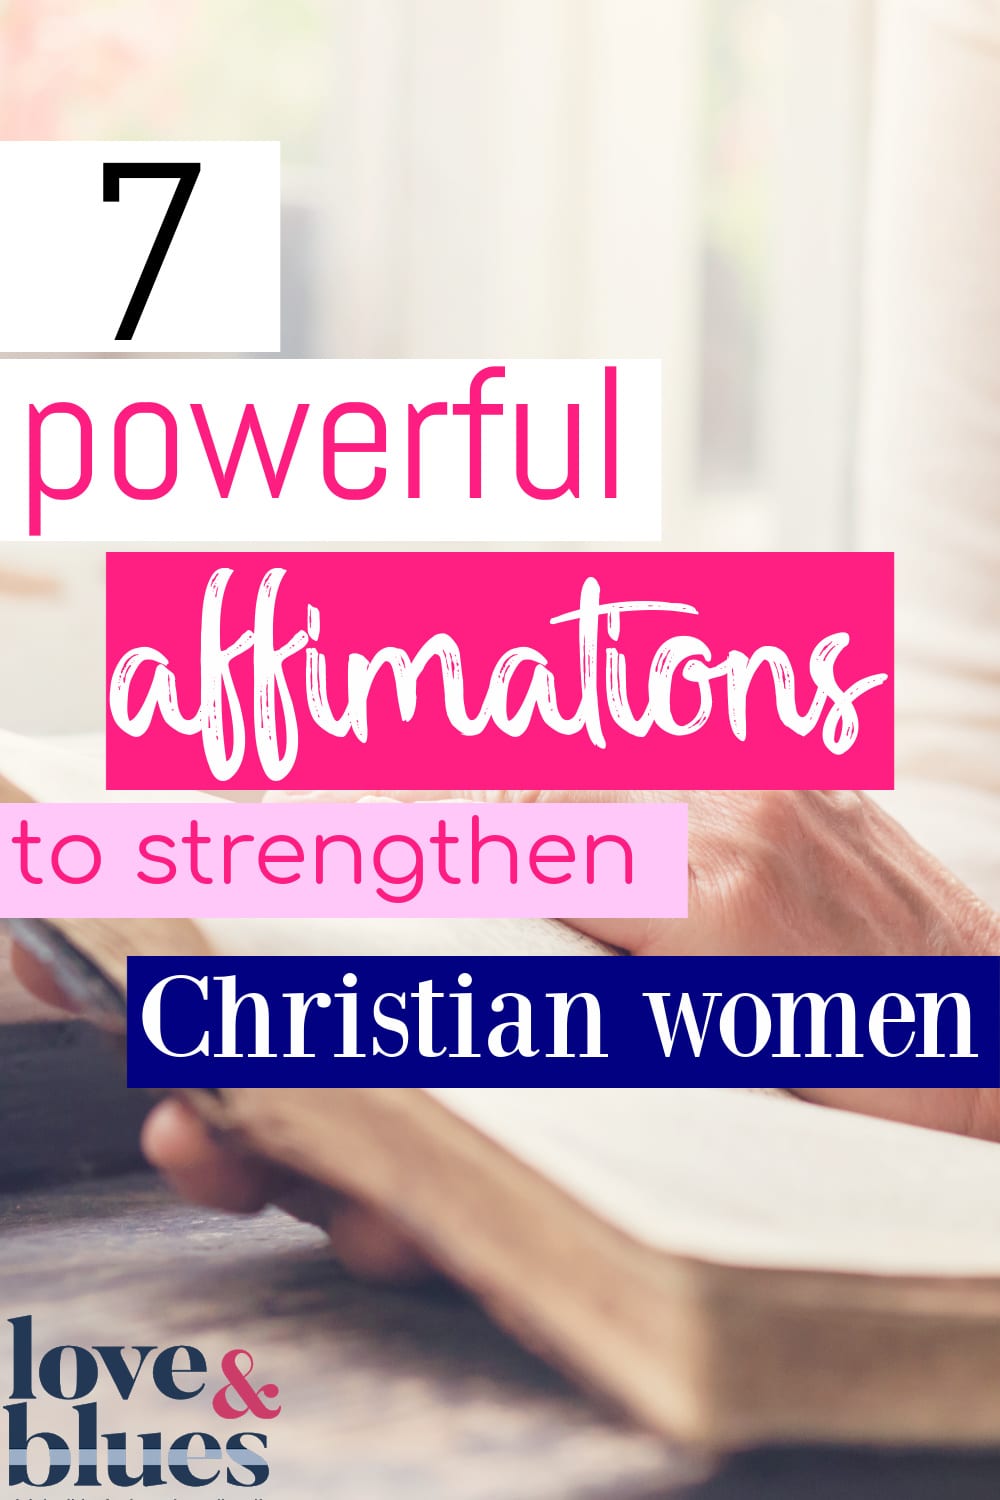 Amazing biblical affirmations based on SCRIPTURE to help strengthen the Christian woman! a MUST read in this day and age!